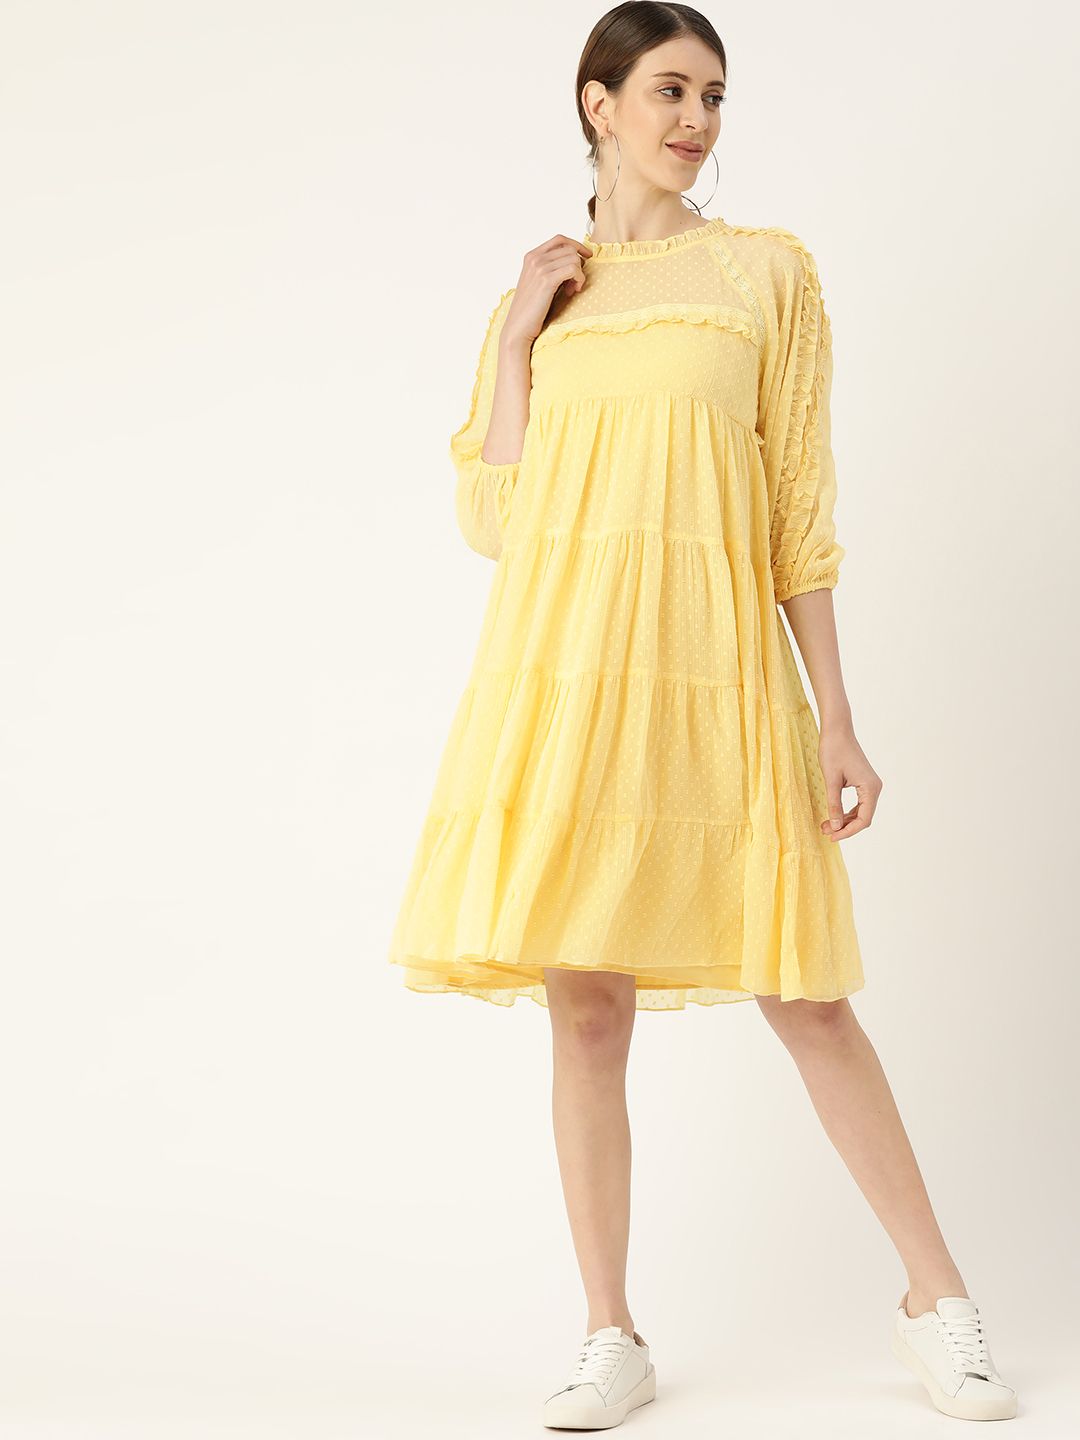 Antheaa Yellow Self Design A-Line Tiered Dress With Lace Inserts & Puff Sleeves Price in India